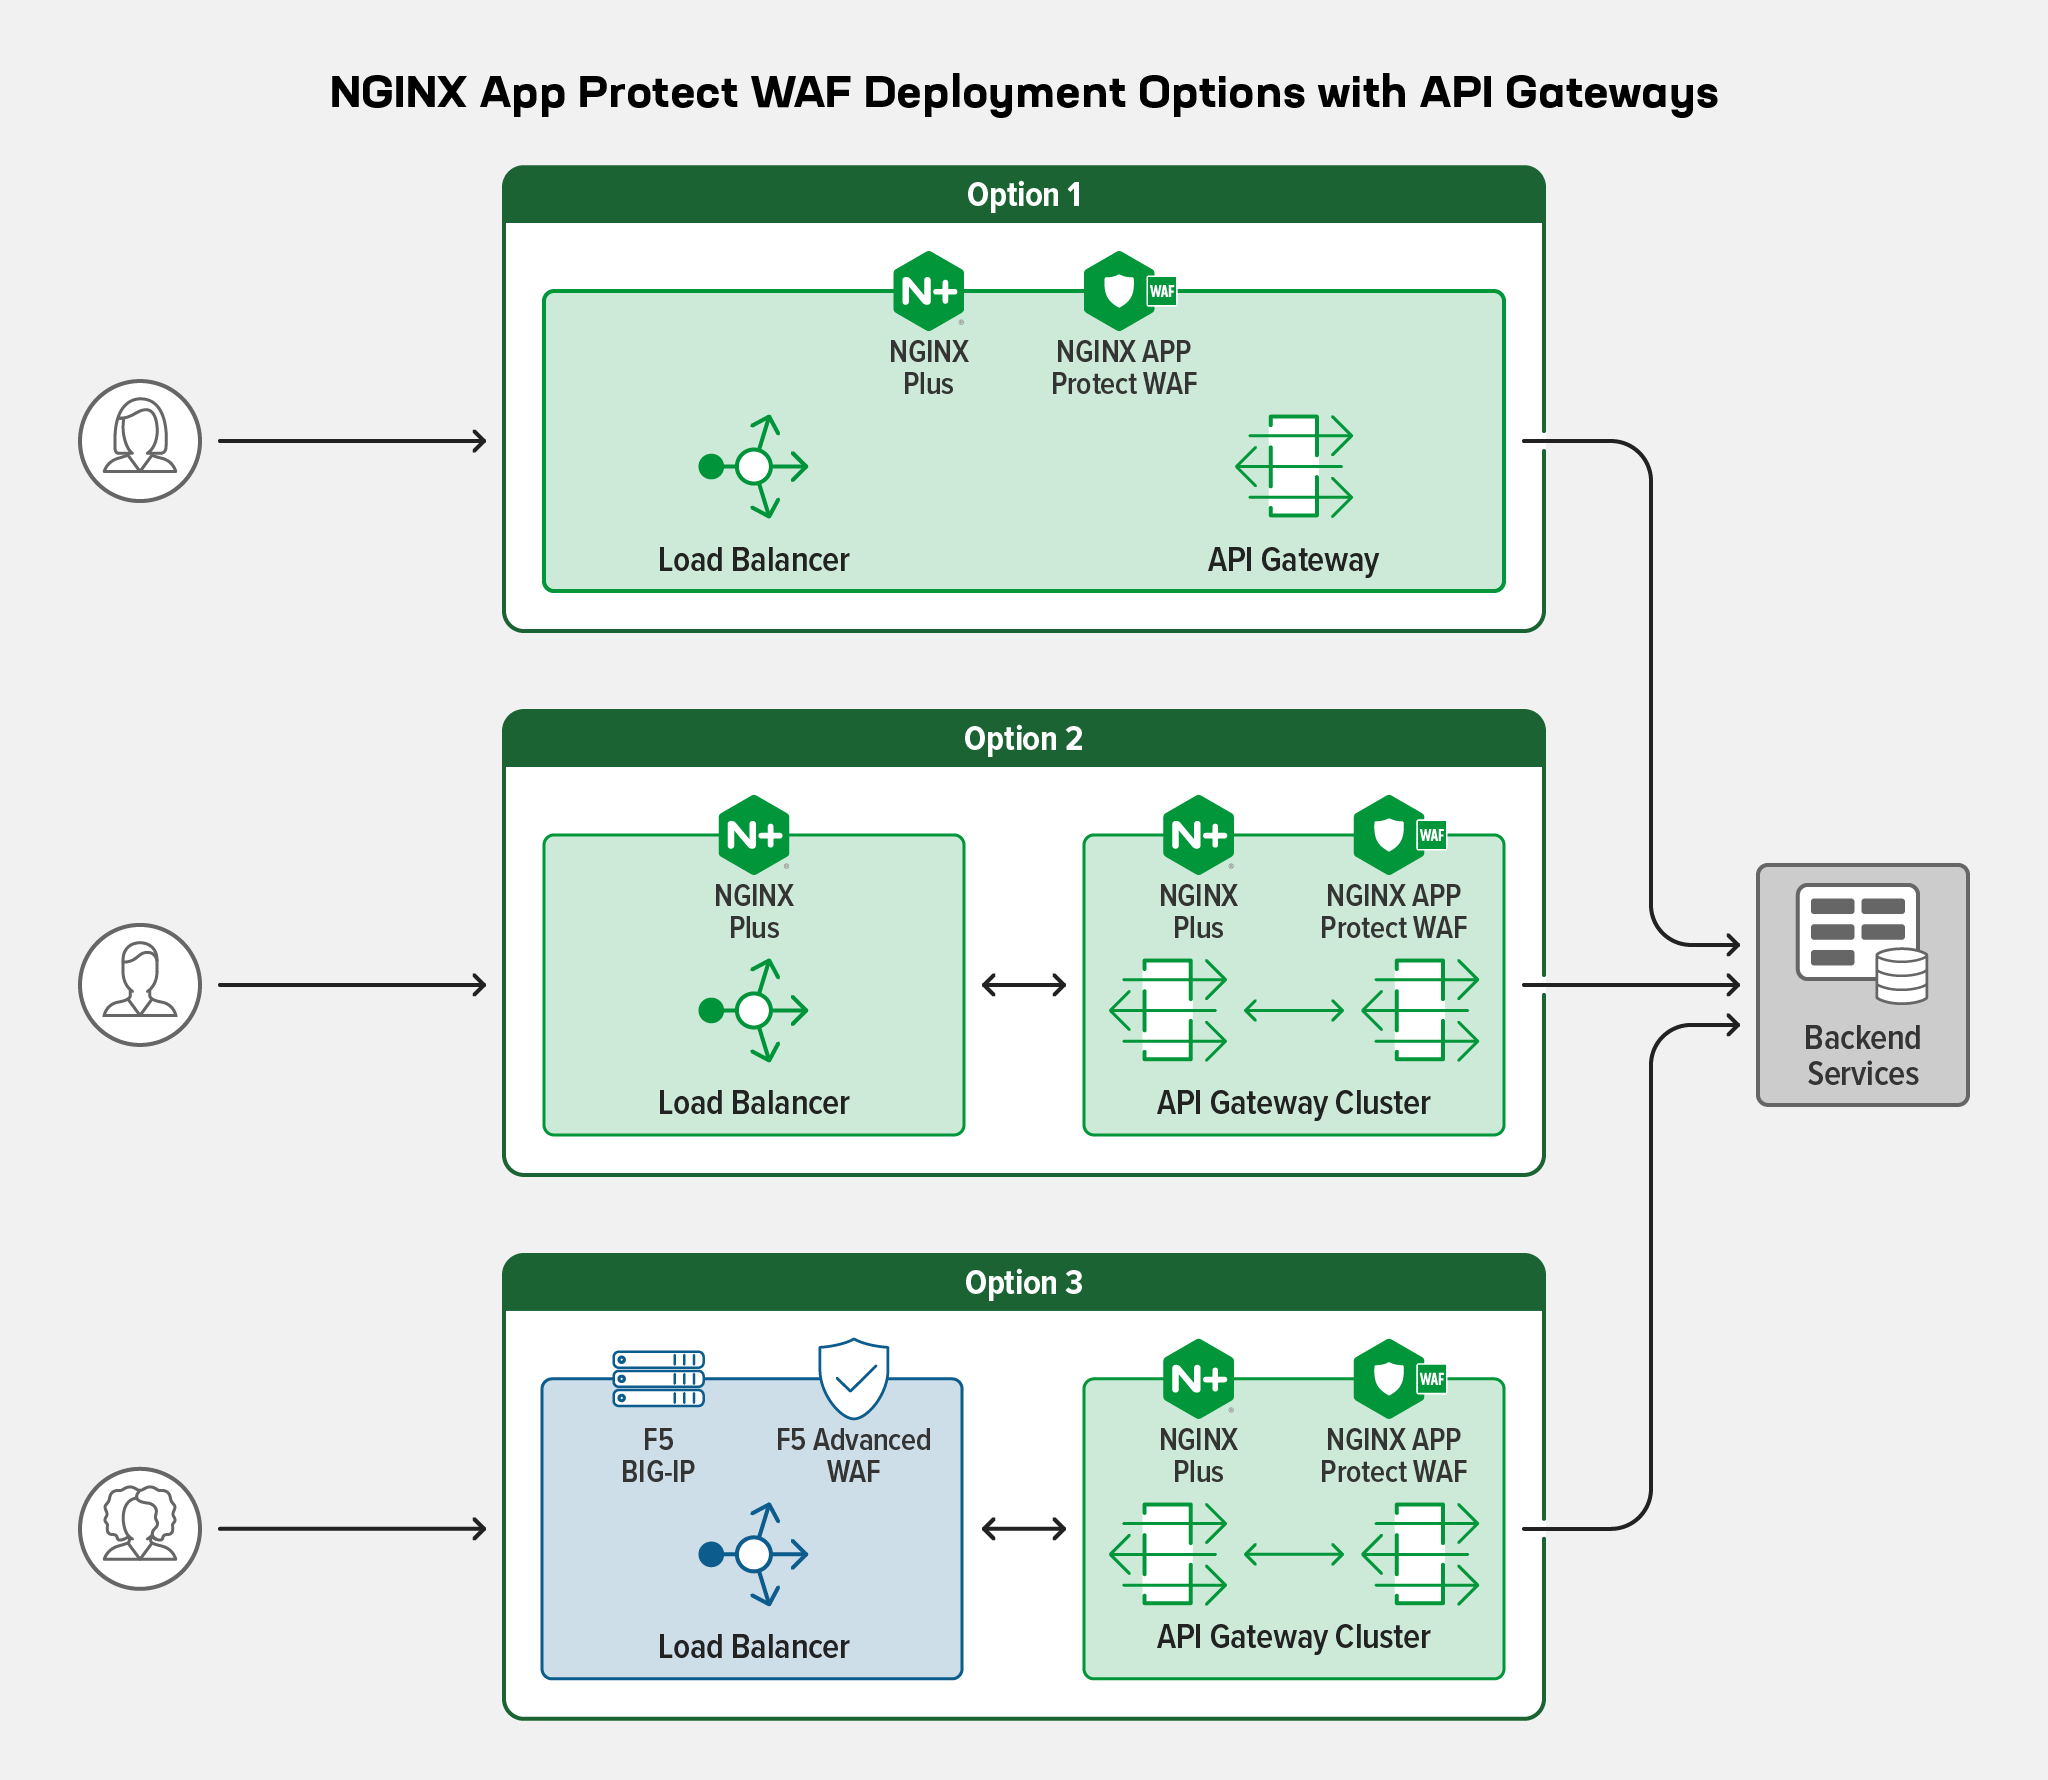 Topology diagram of three options for deploying NGINX App Protect WAF with API gateways